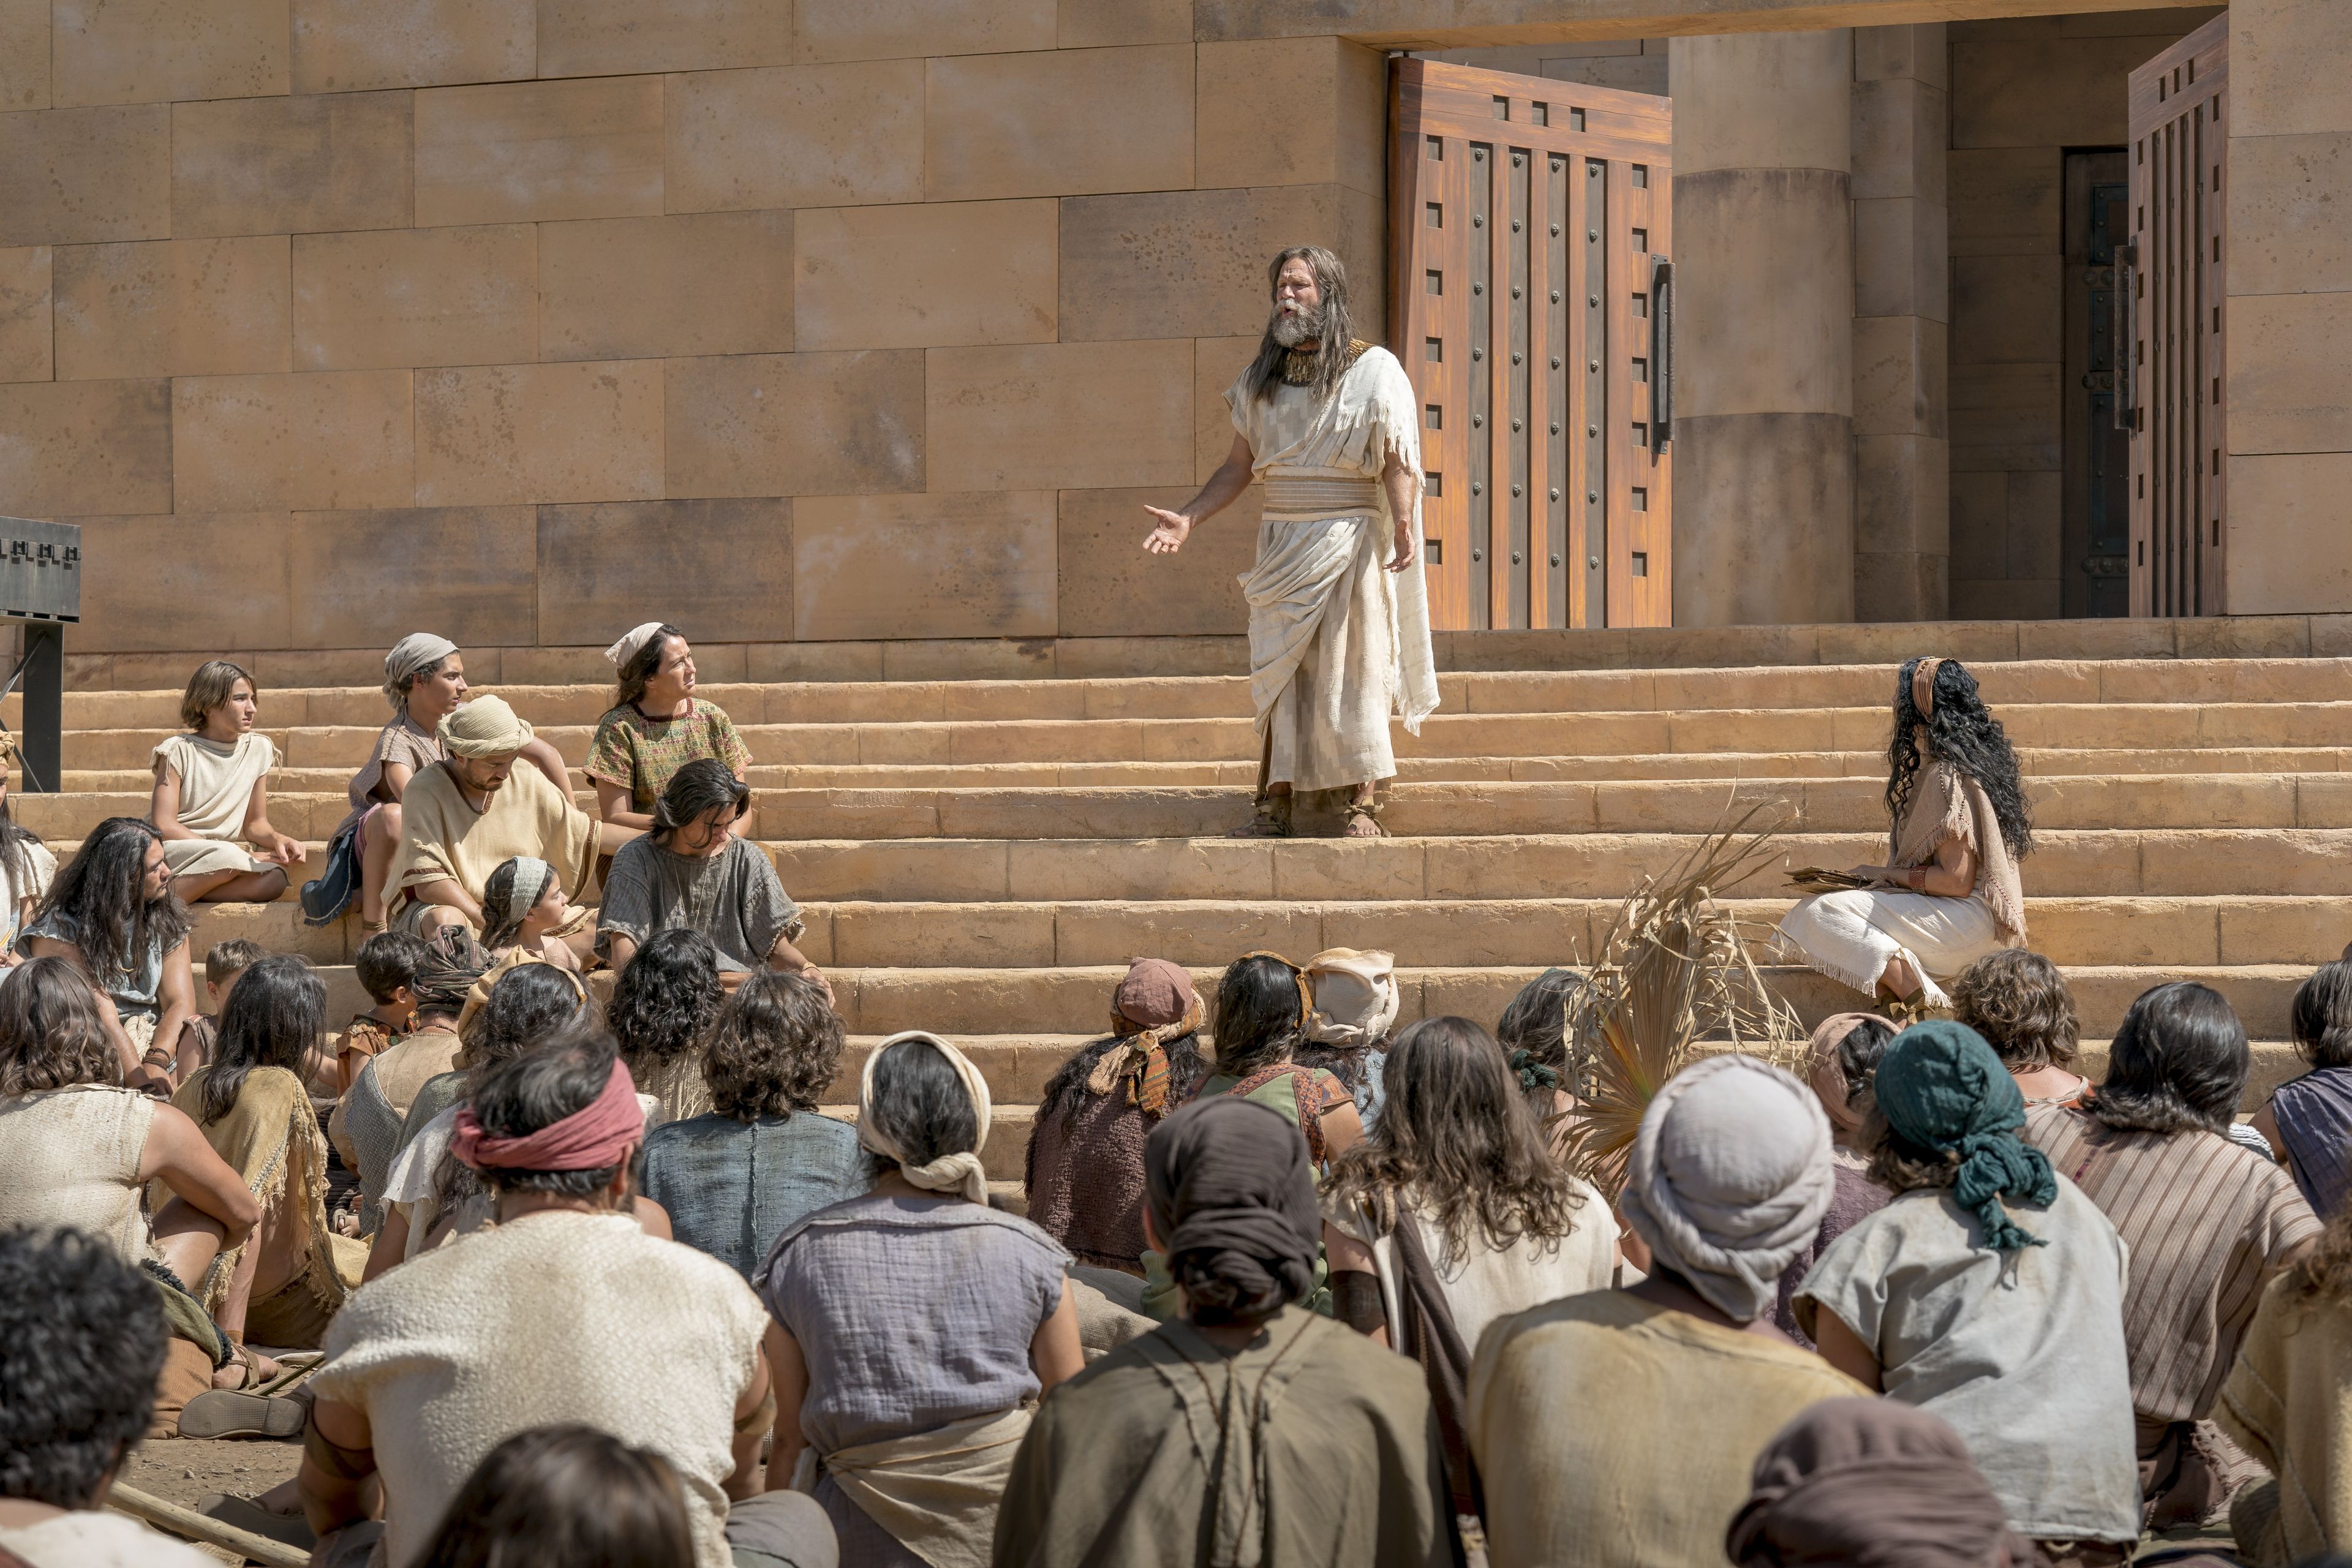 Jacob stands on the steps of the temple as he teaches the Nephite people about pride and chastity.